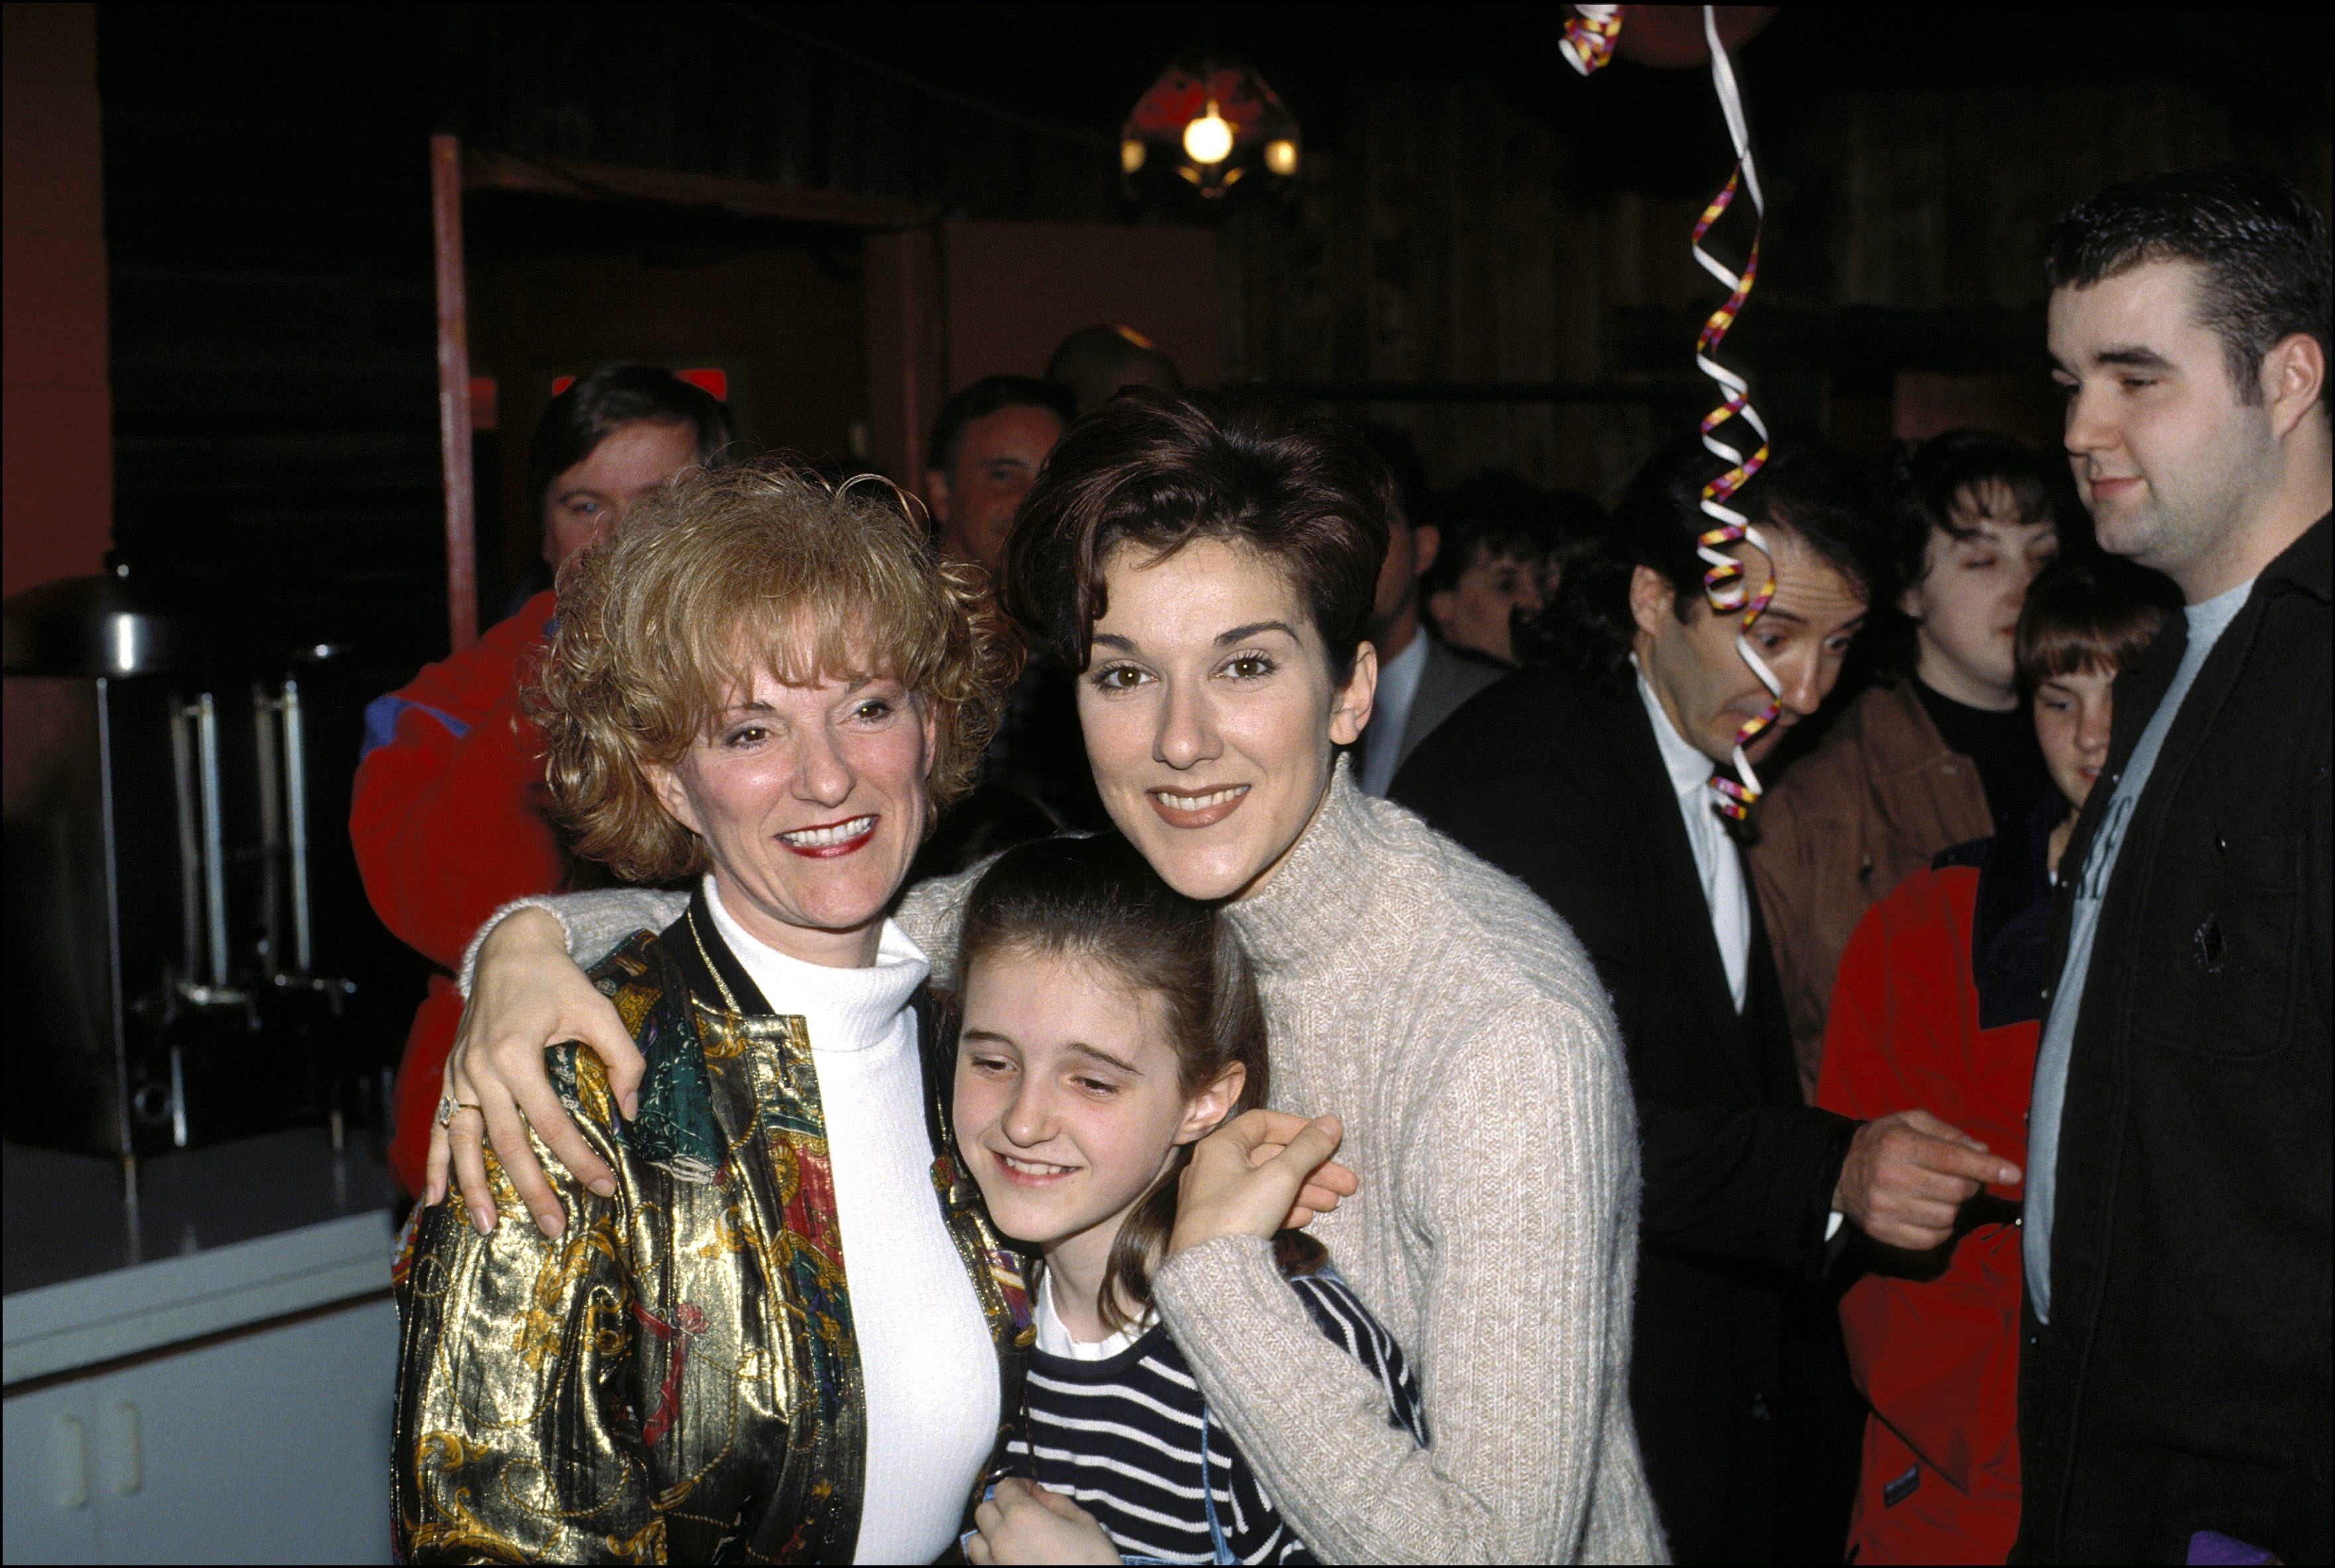 Celine Dion with her sister, Claudette Dion and an unidentified girl celebrating her 27th birthday in 1995 | Source: Getty Images